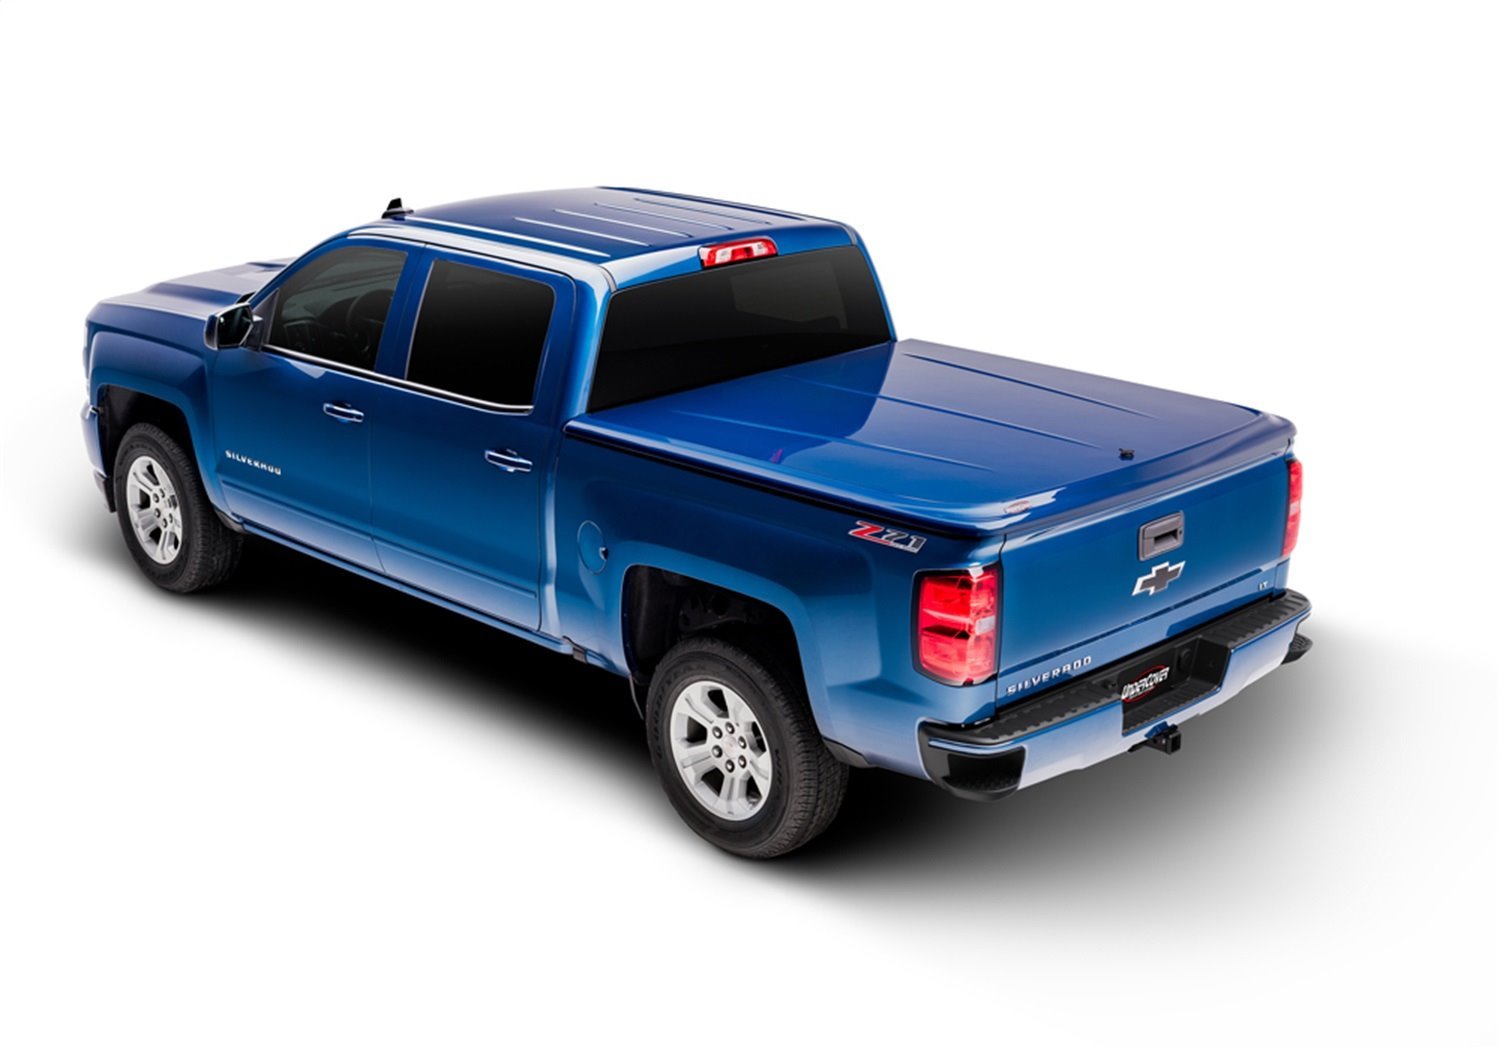 UC3086L-PW7 LUX Hard Non-Folding Cover, 2009-2018 (Fits Select Classic) Ram 5'7" Bed Crew Cab, w/o RamBox, PW7 Bright White